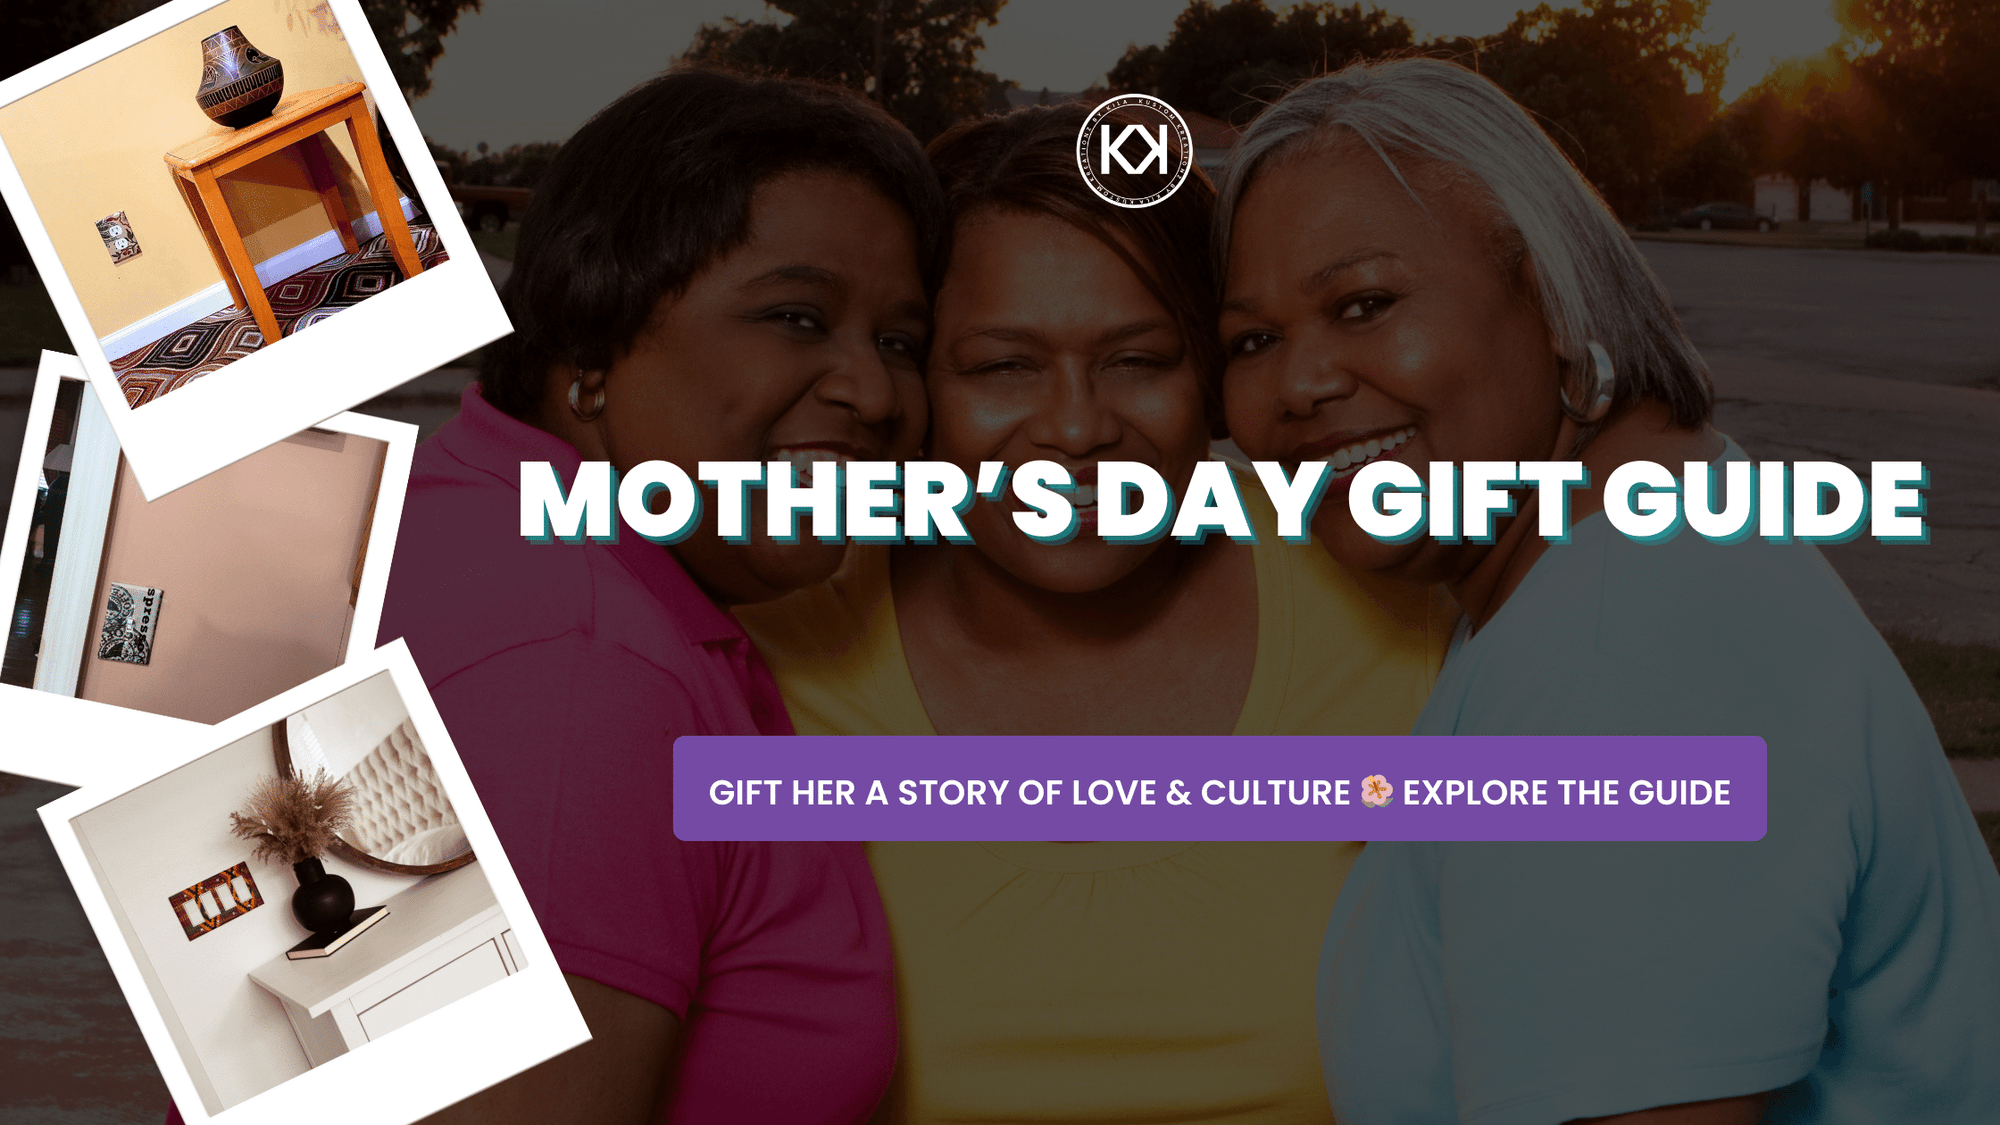 Kustom Kreationz by Kila | Mother's Day Gift Guide | Gift Her a Story of Love & Culture 🌺 Explore the Guide